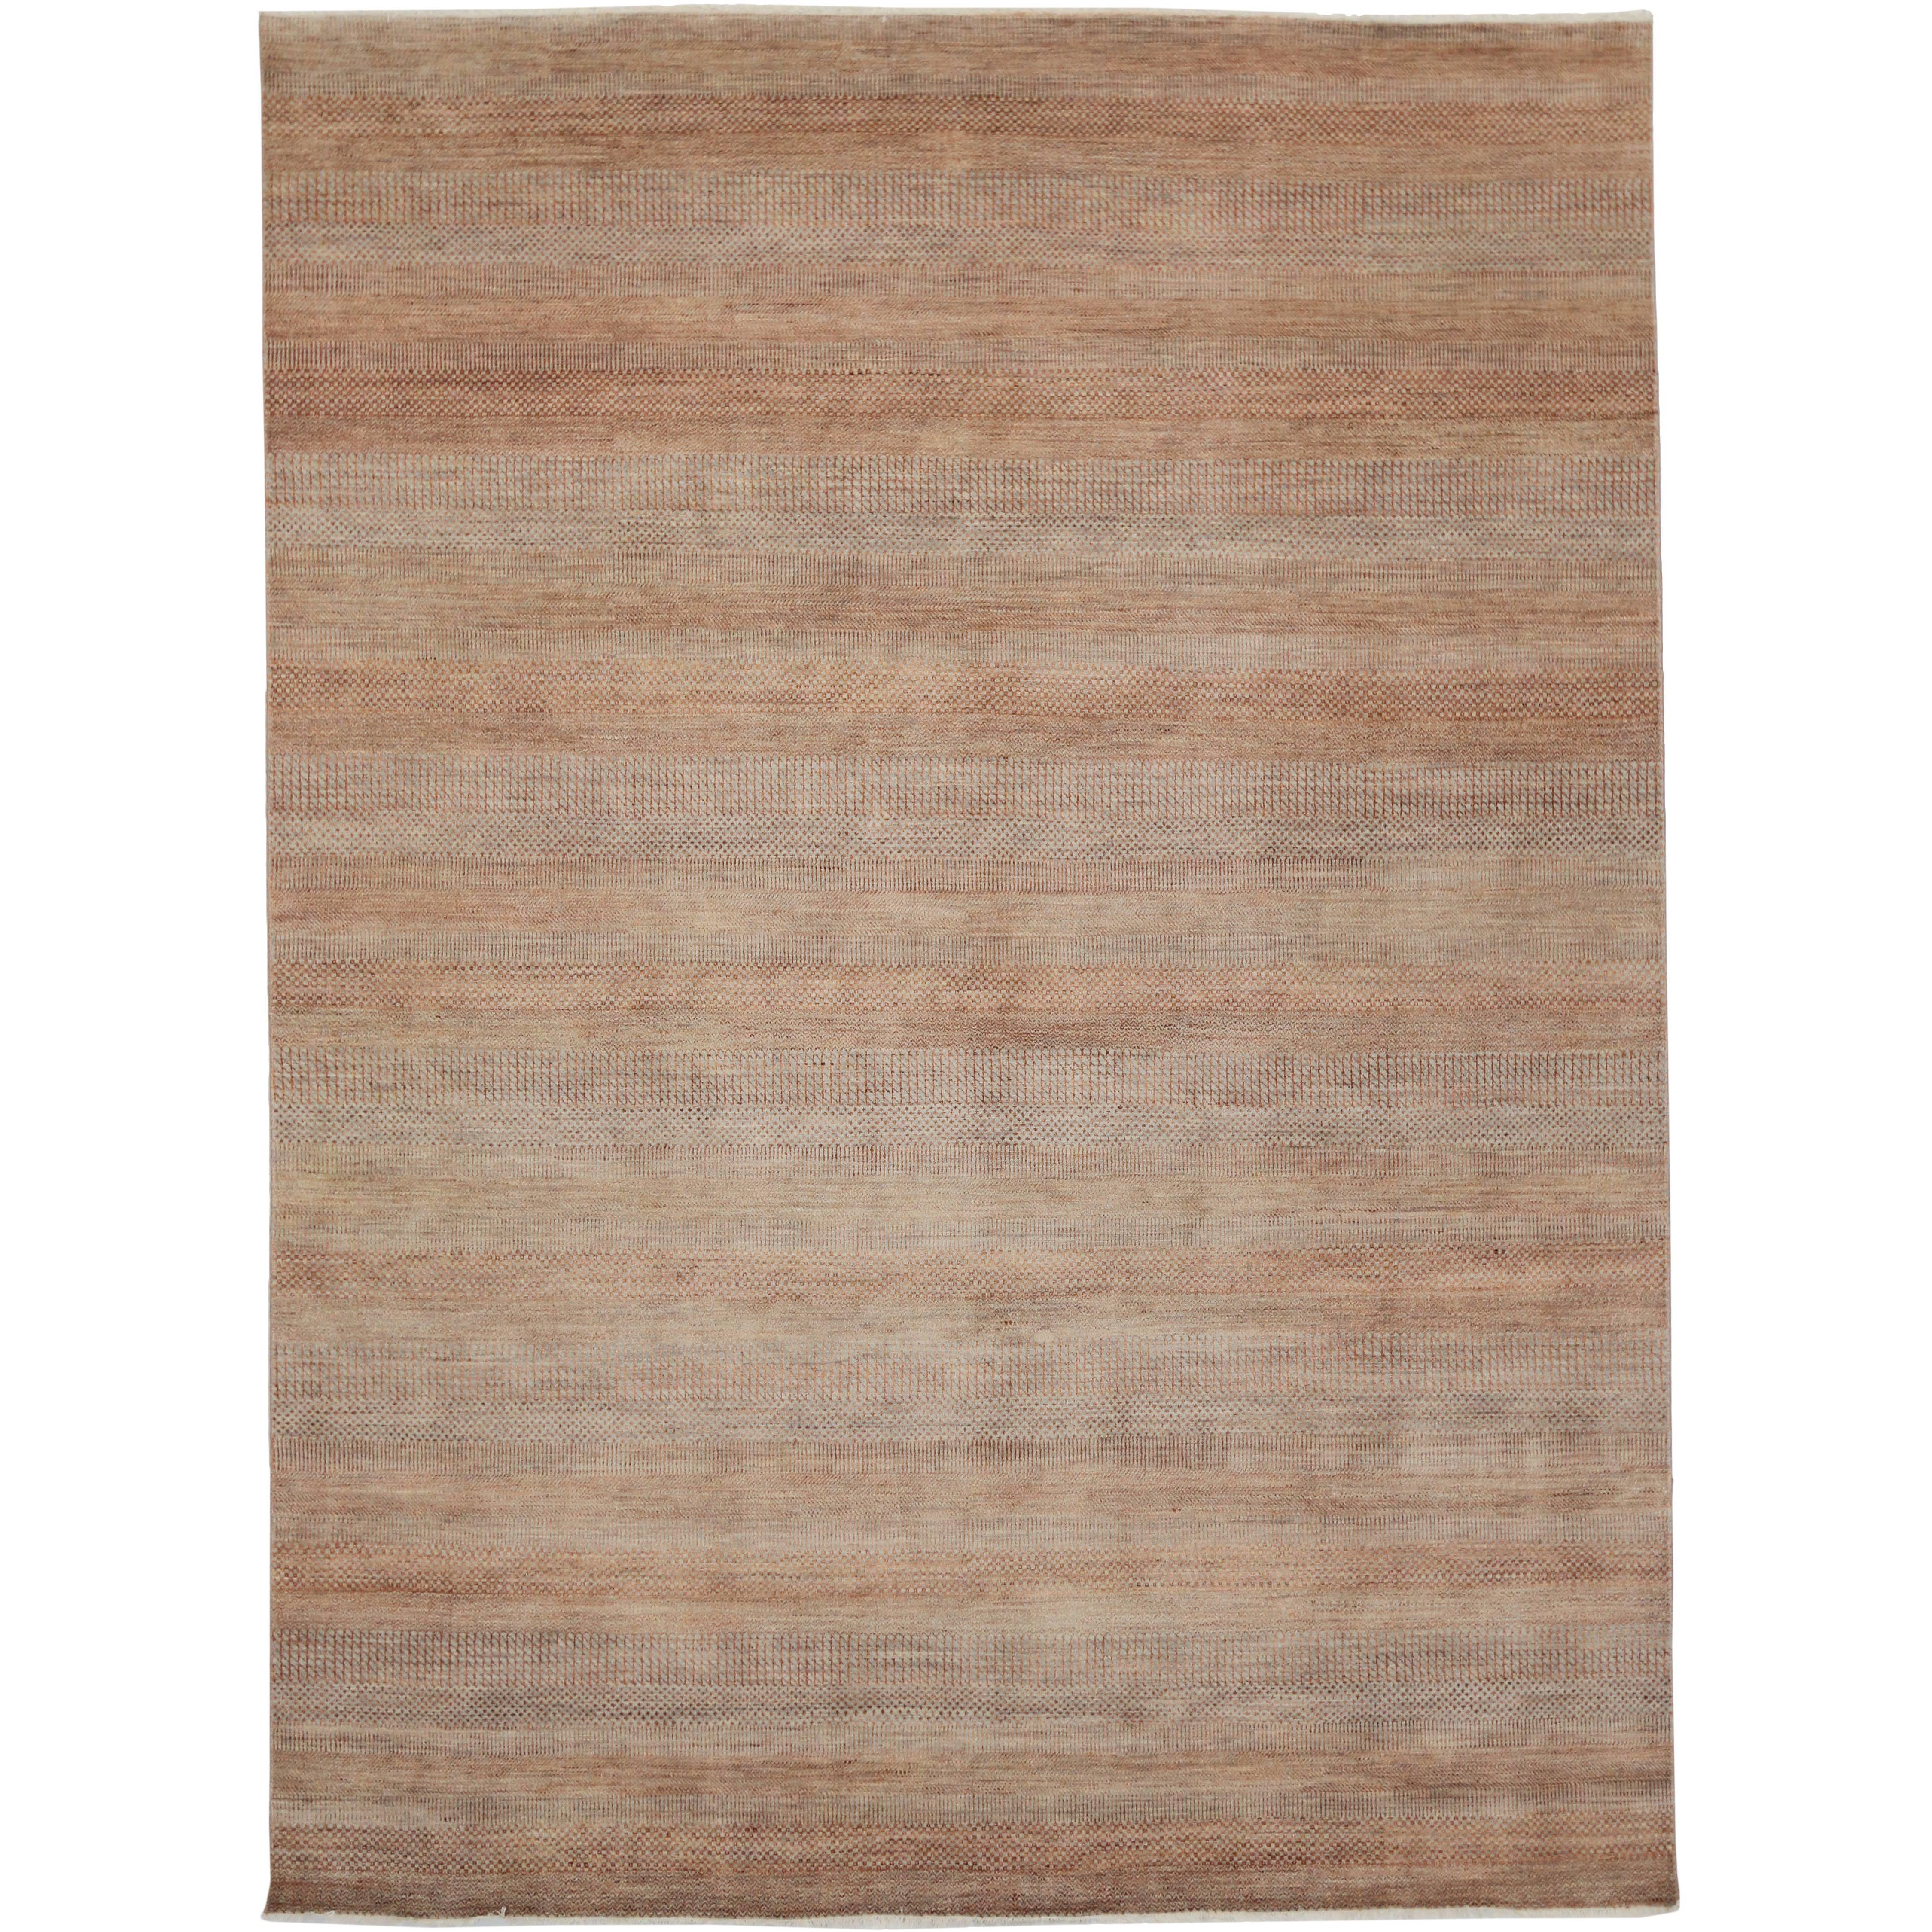 New Modern Transitional Orange-Grey Area Rug with Grasscloth Pattern